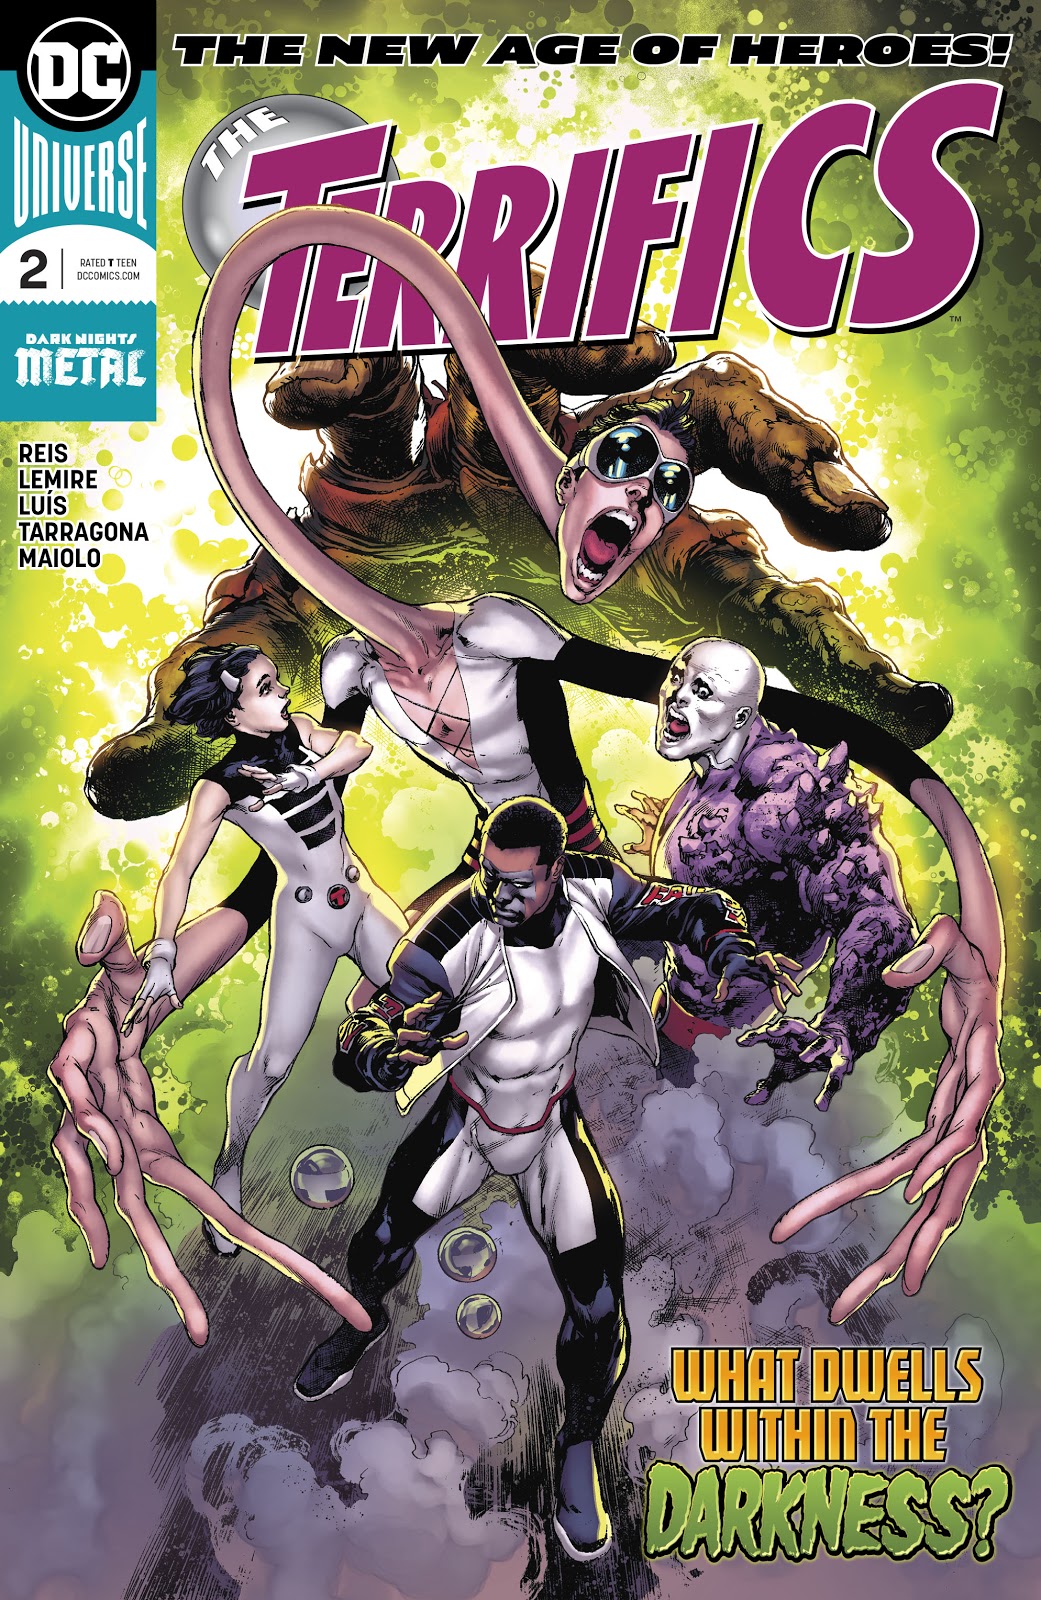 THE TERRIFICS From Dark Nights Metal DC Comics 'The New Age Of Heroes' 